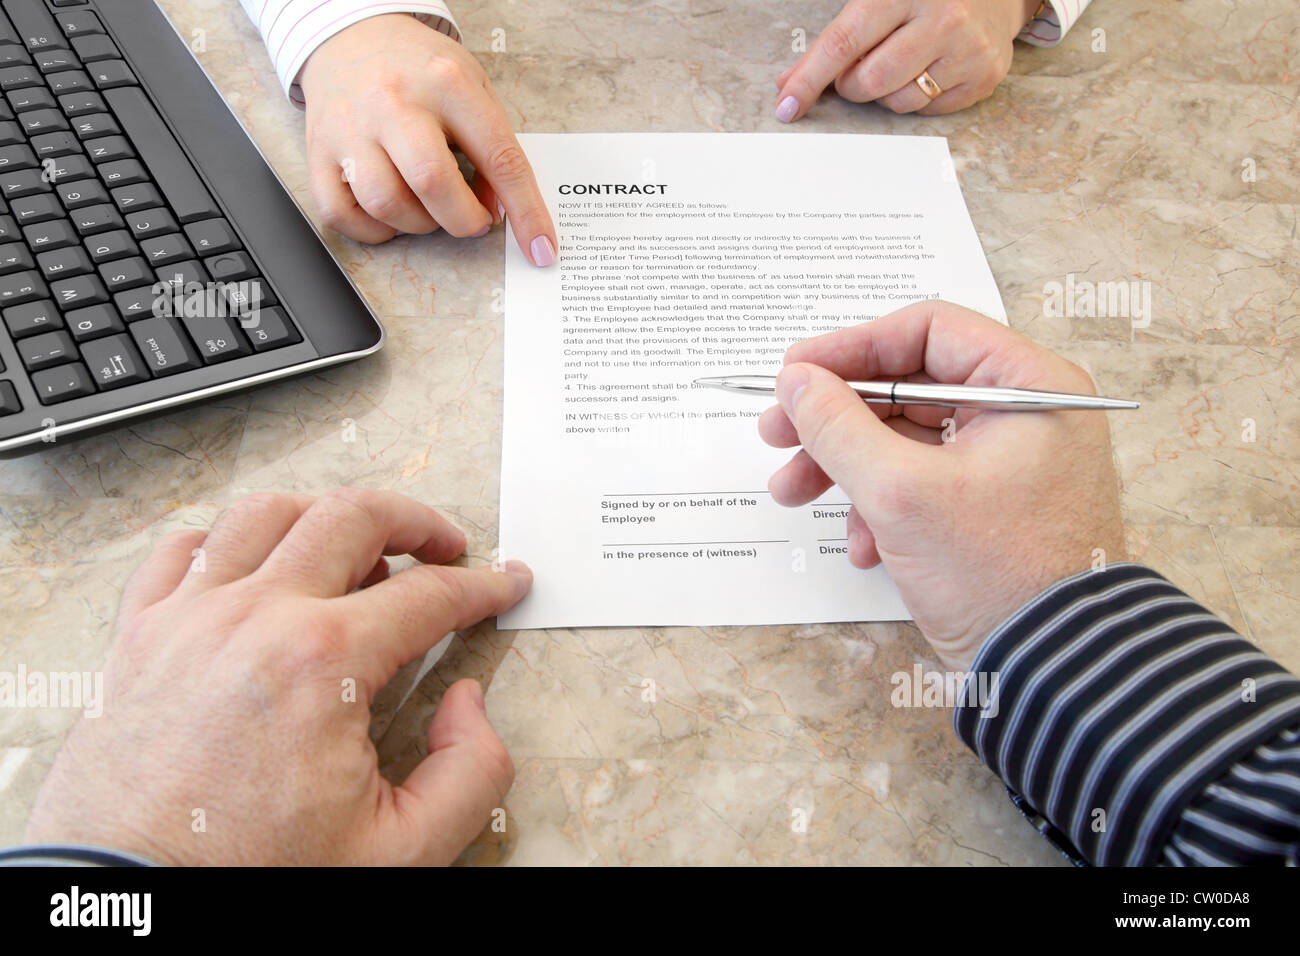 Signing a Contract Stock Photo